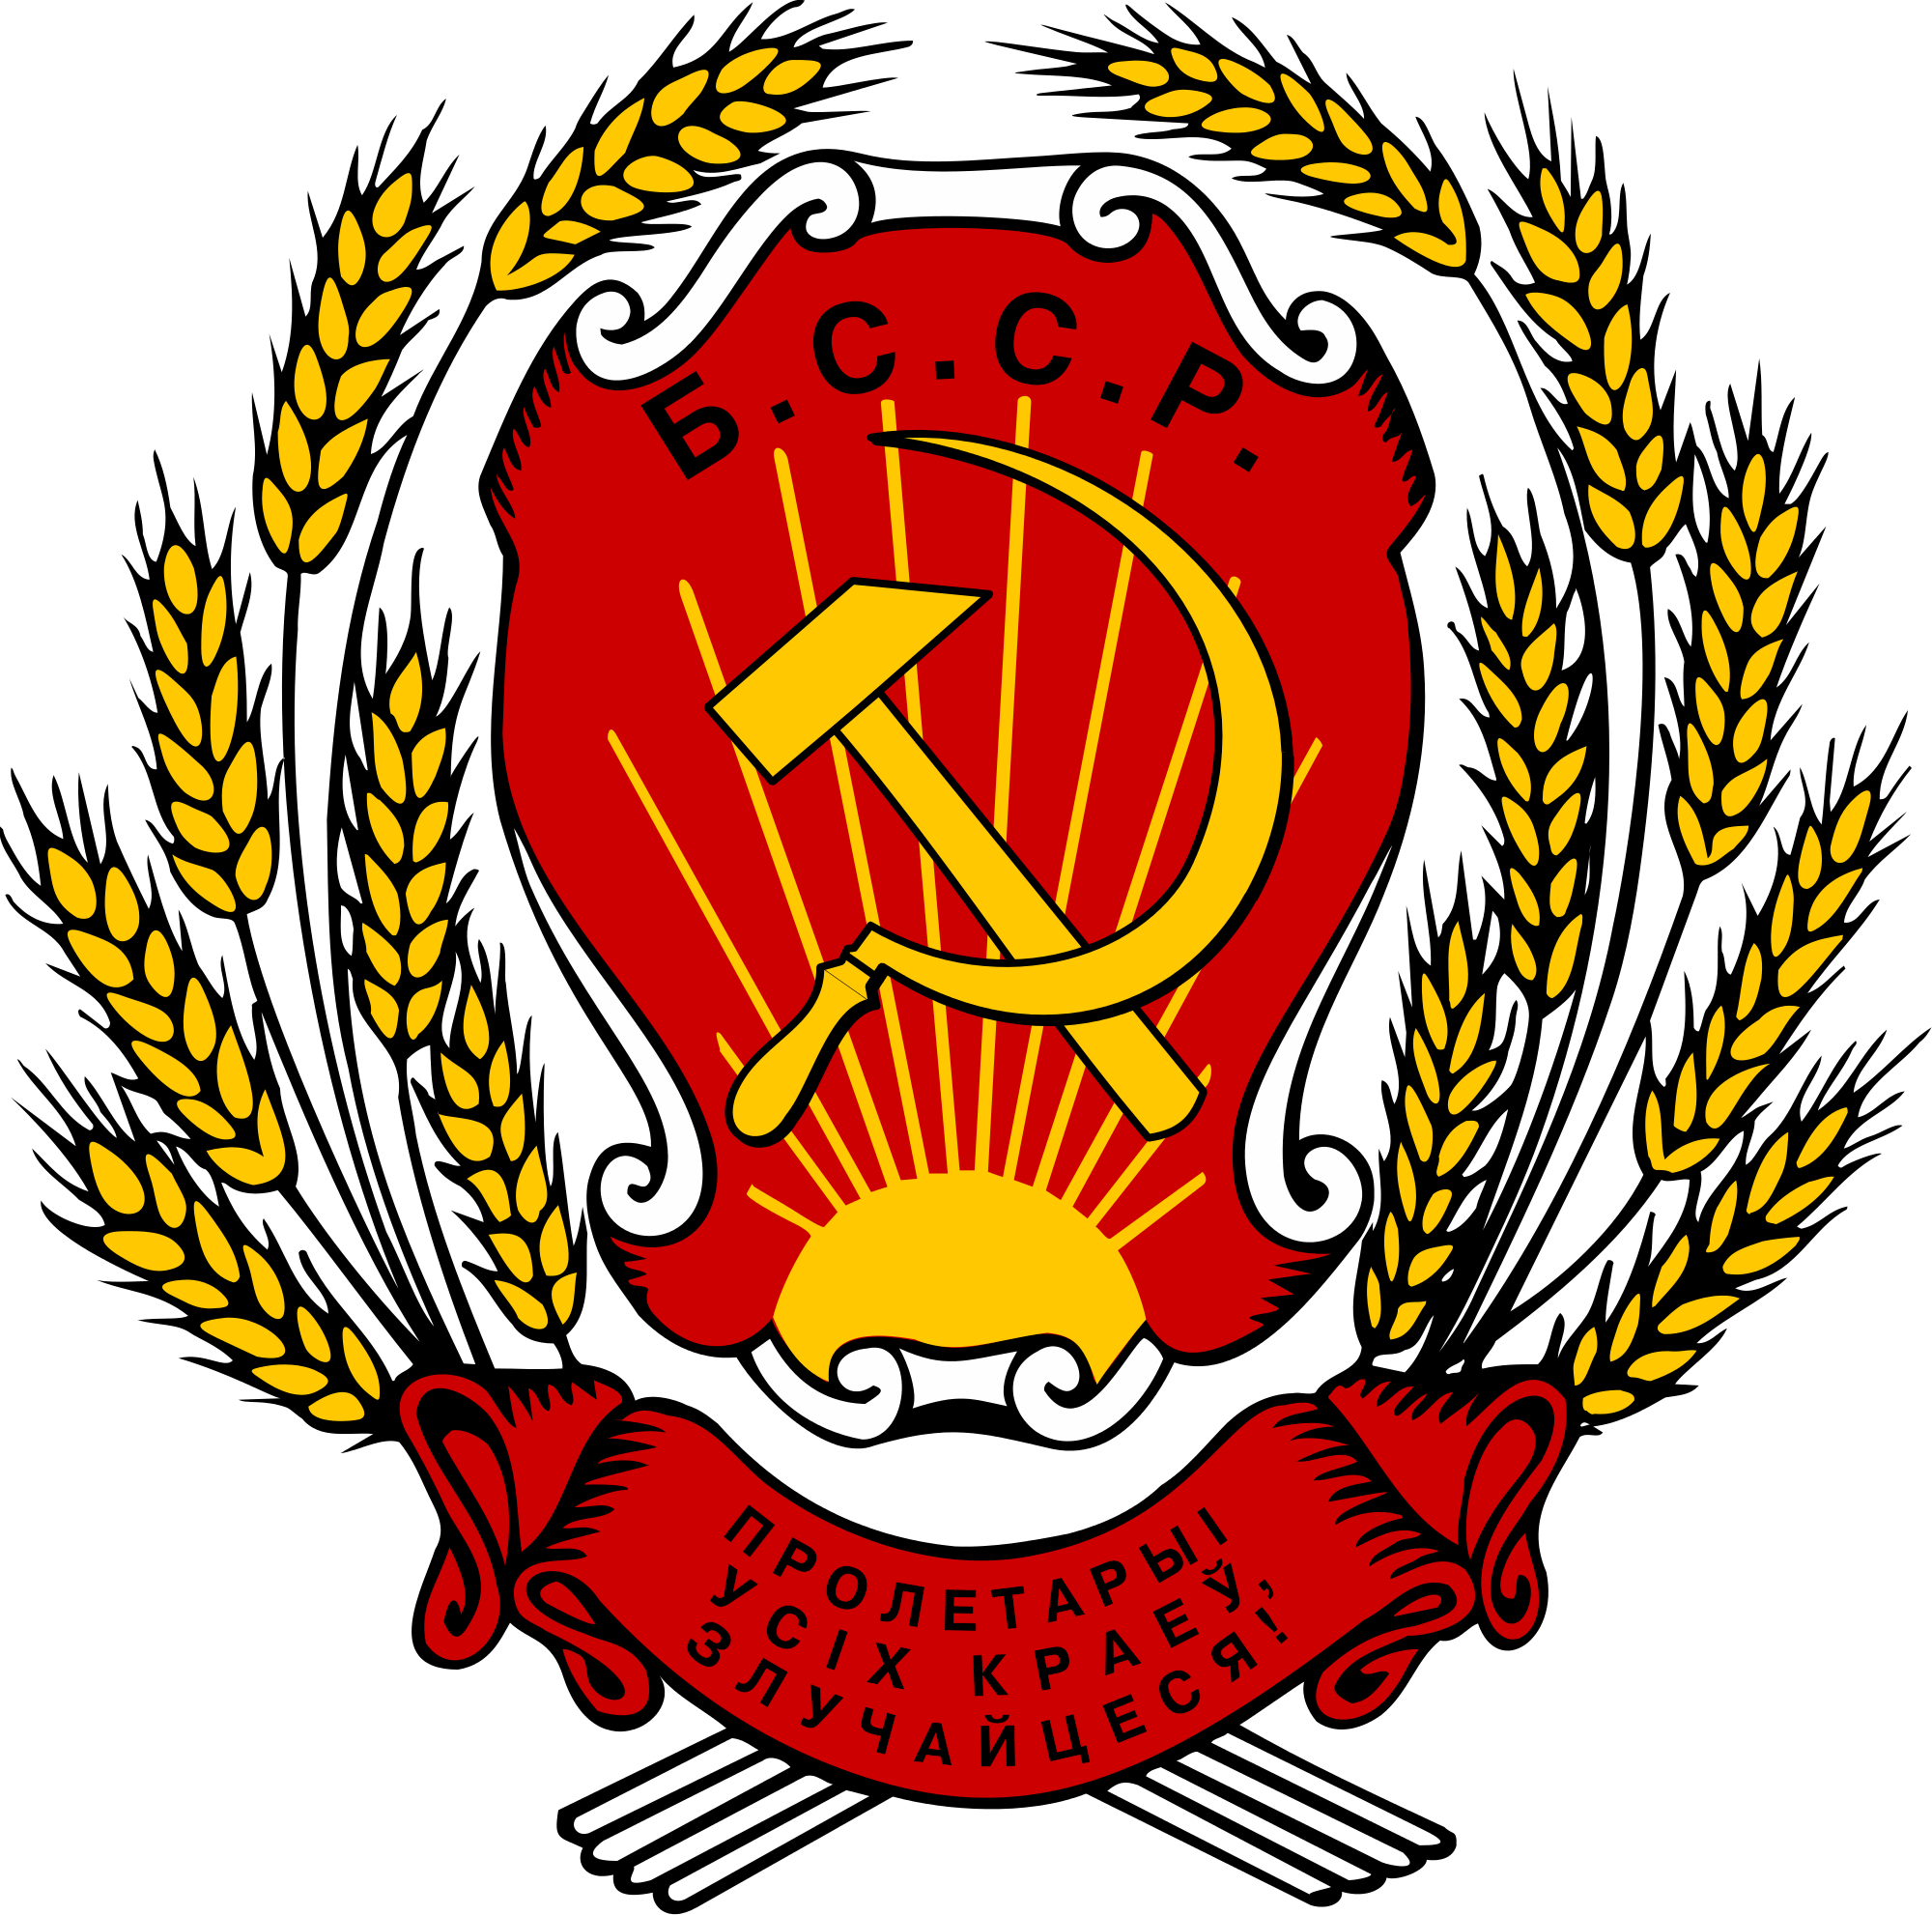 A Red And Yellow Emblem With A Hammer And Sickle And Wheat